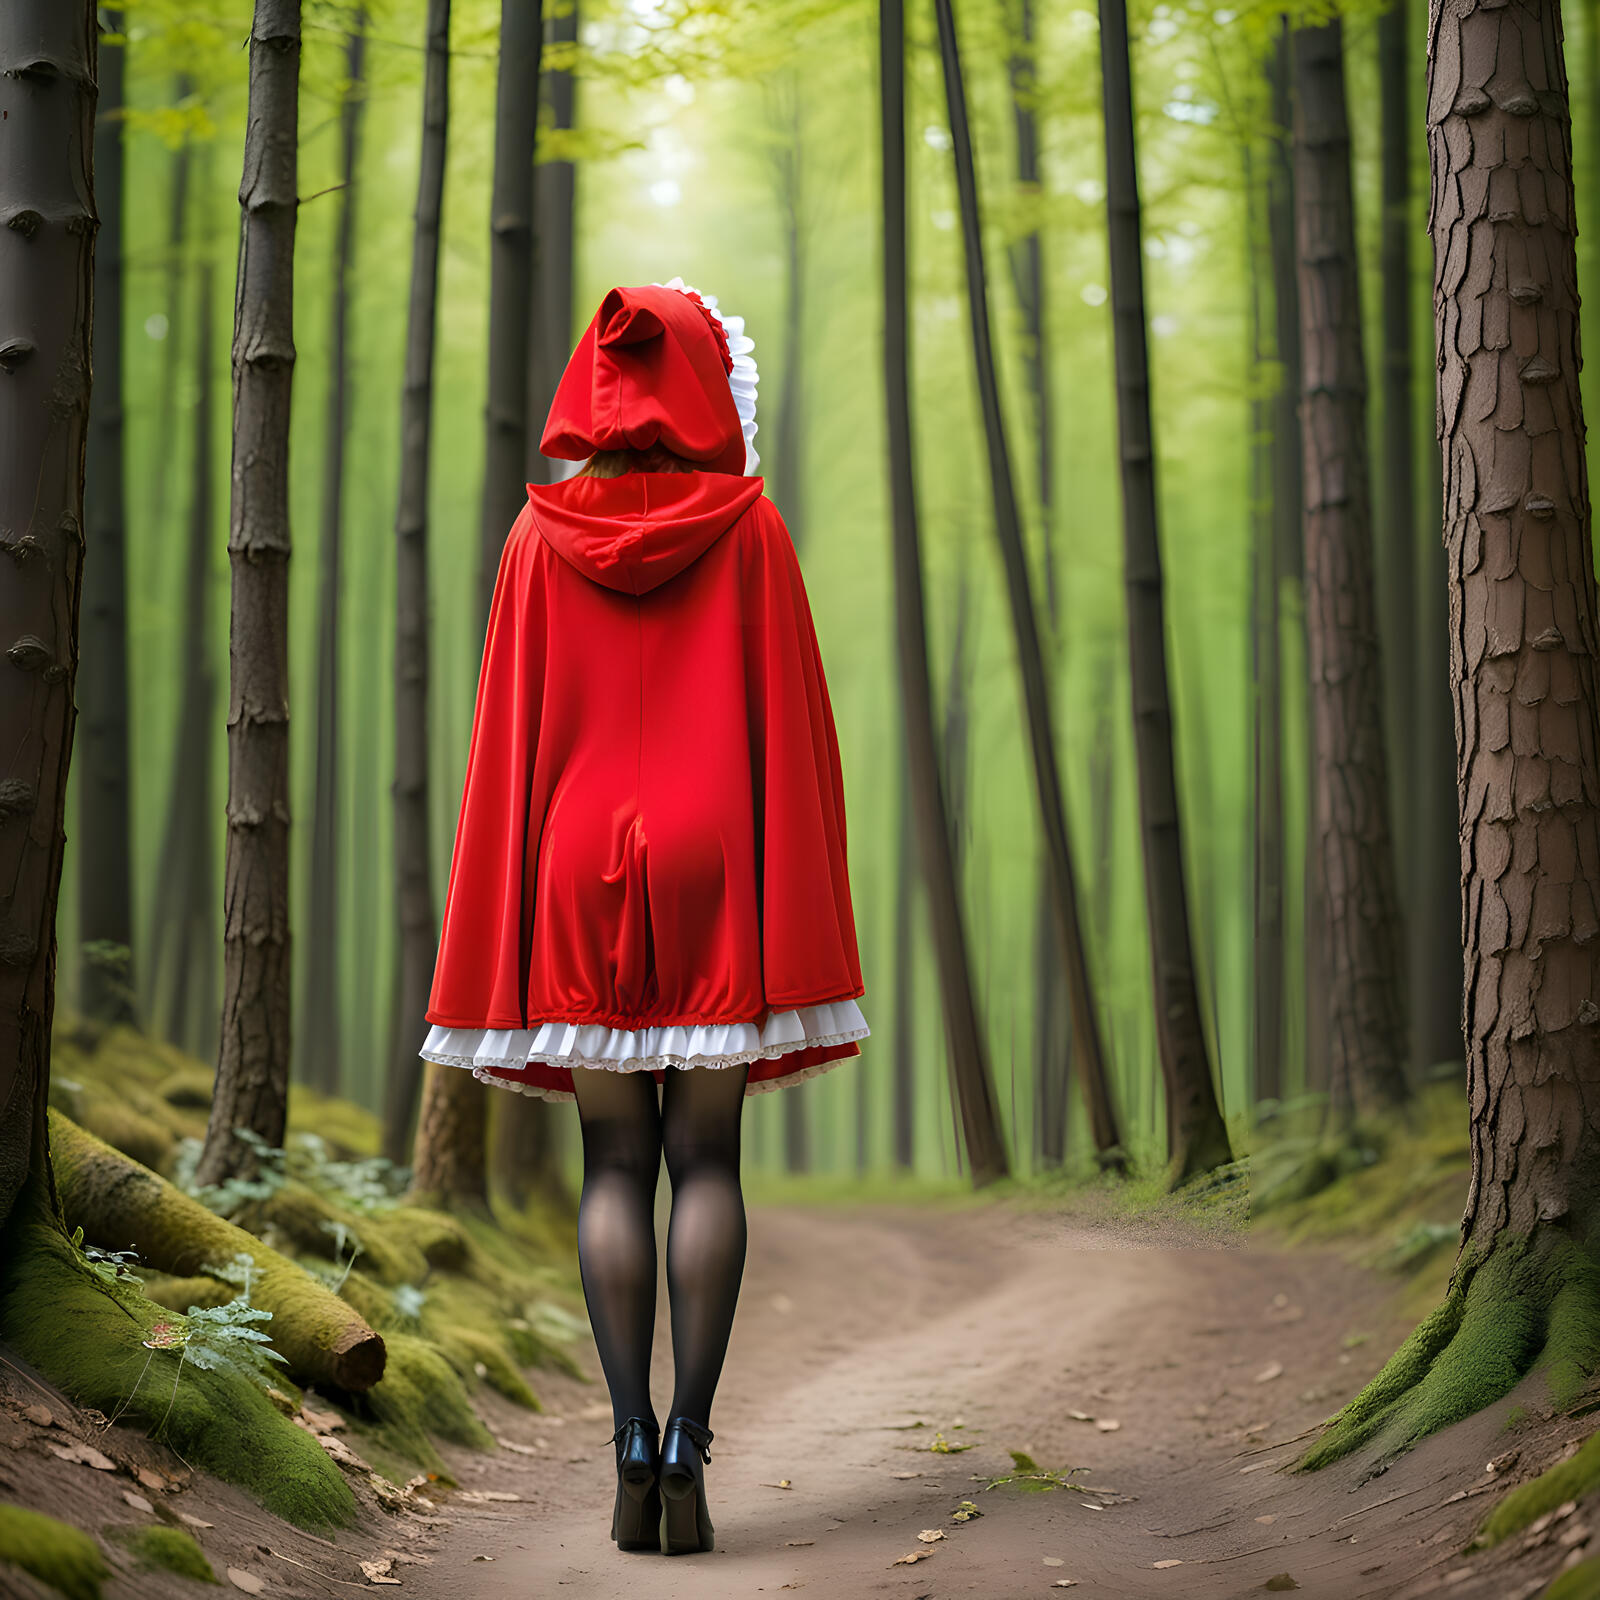 Free photo Little Red Riding Hood in the woods.